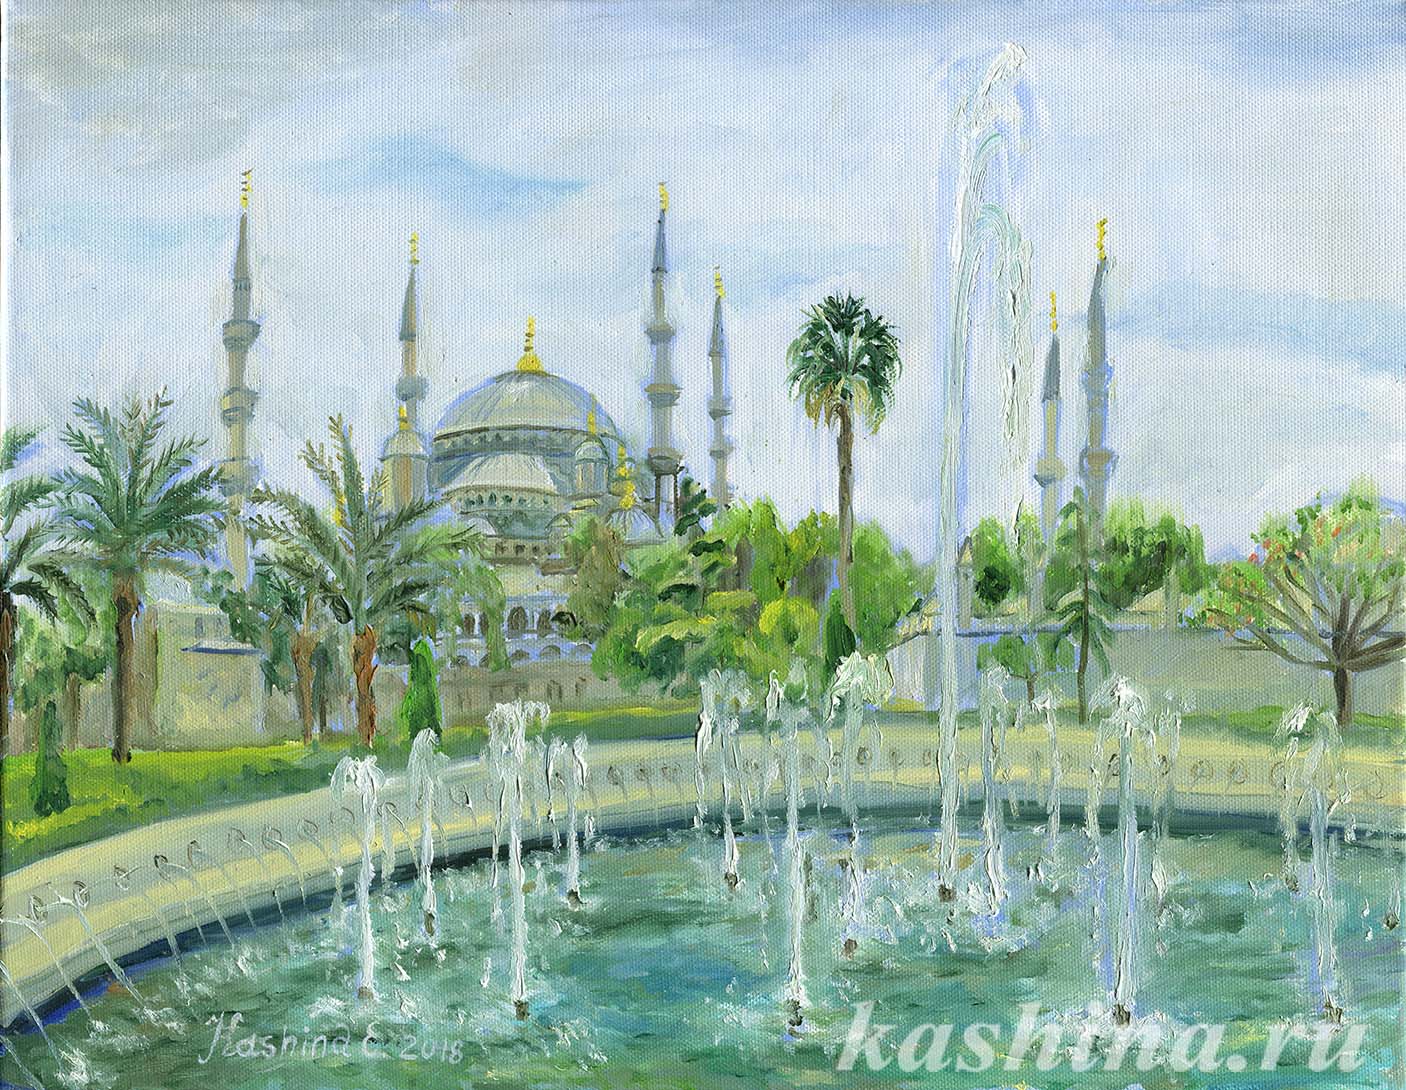 "Fountains in front of the Blue Mosque" Painting by Evgeniya Kashina